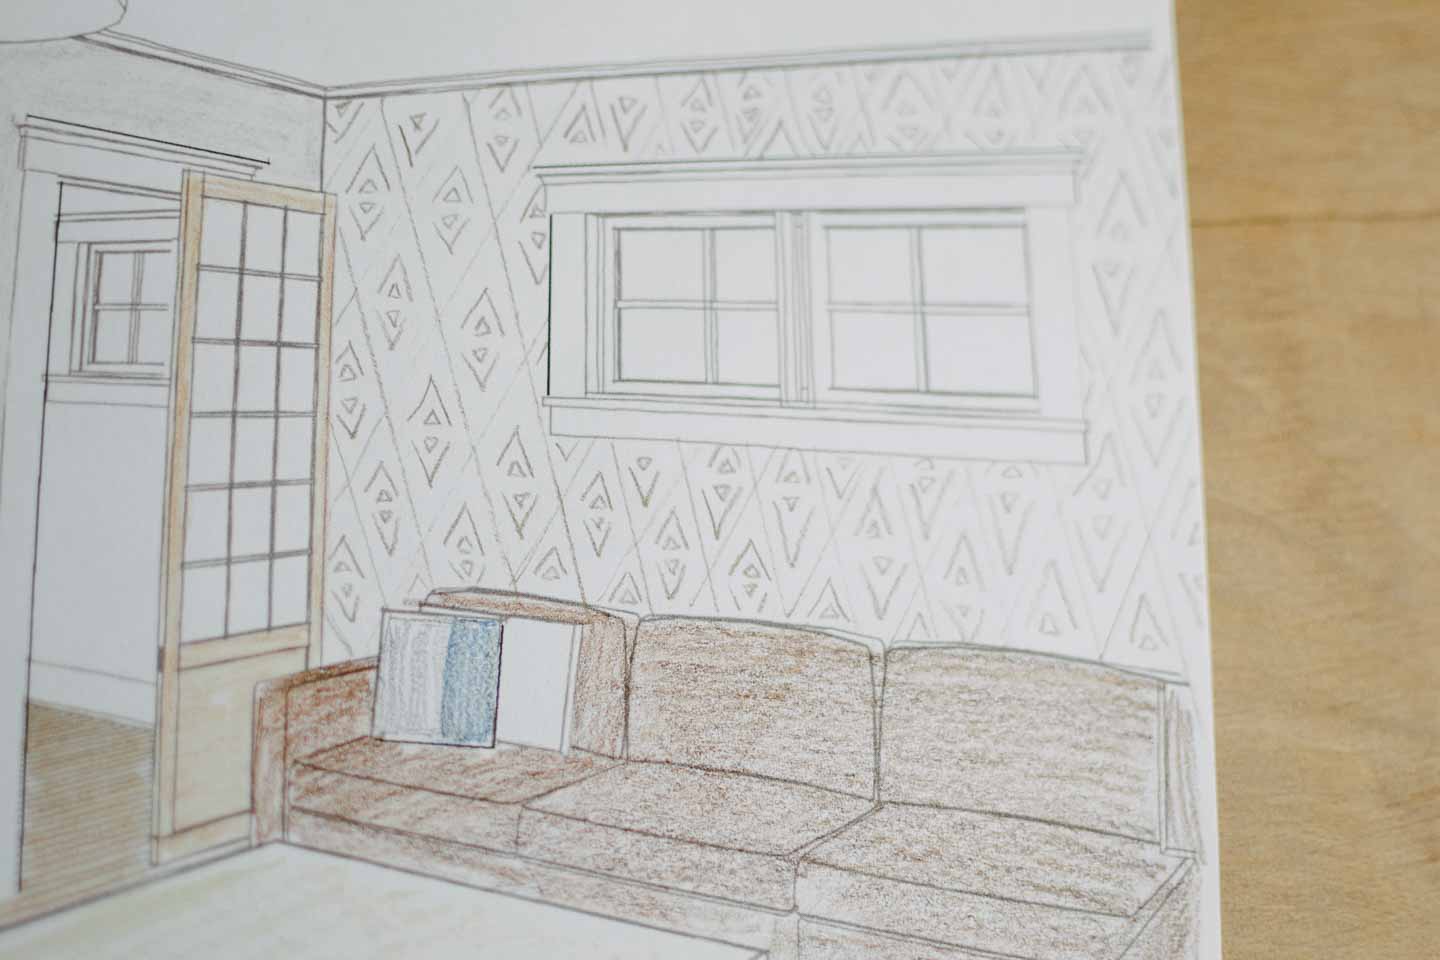 coloring page fixes wall design dilemma